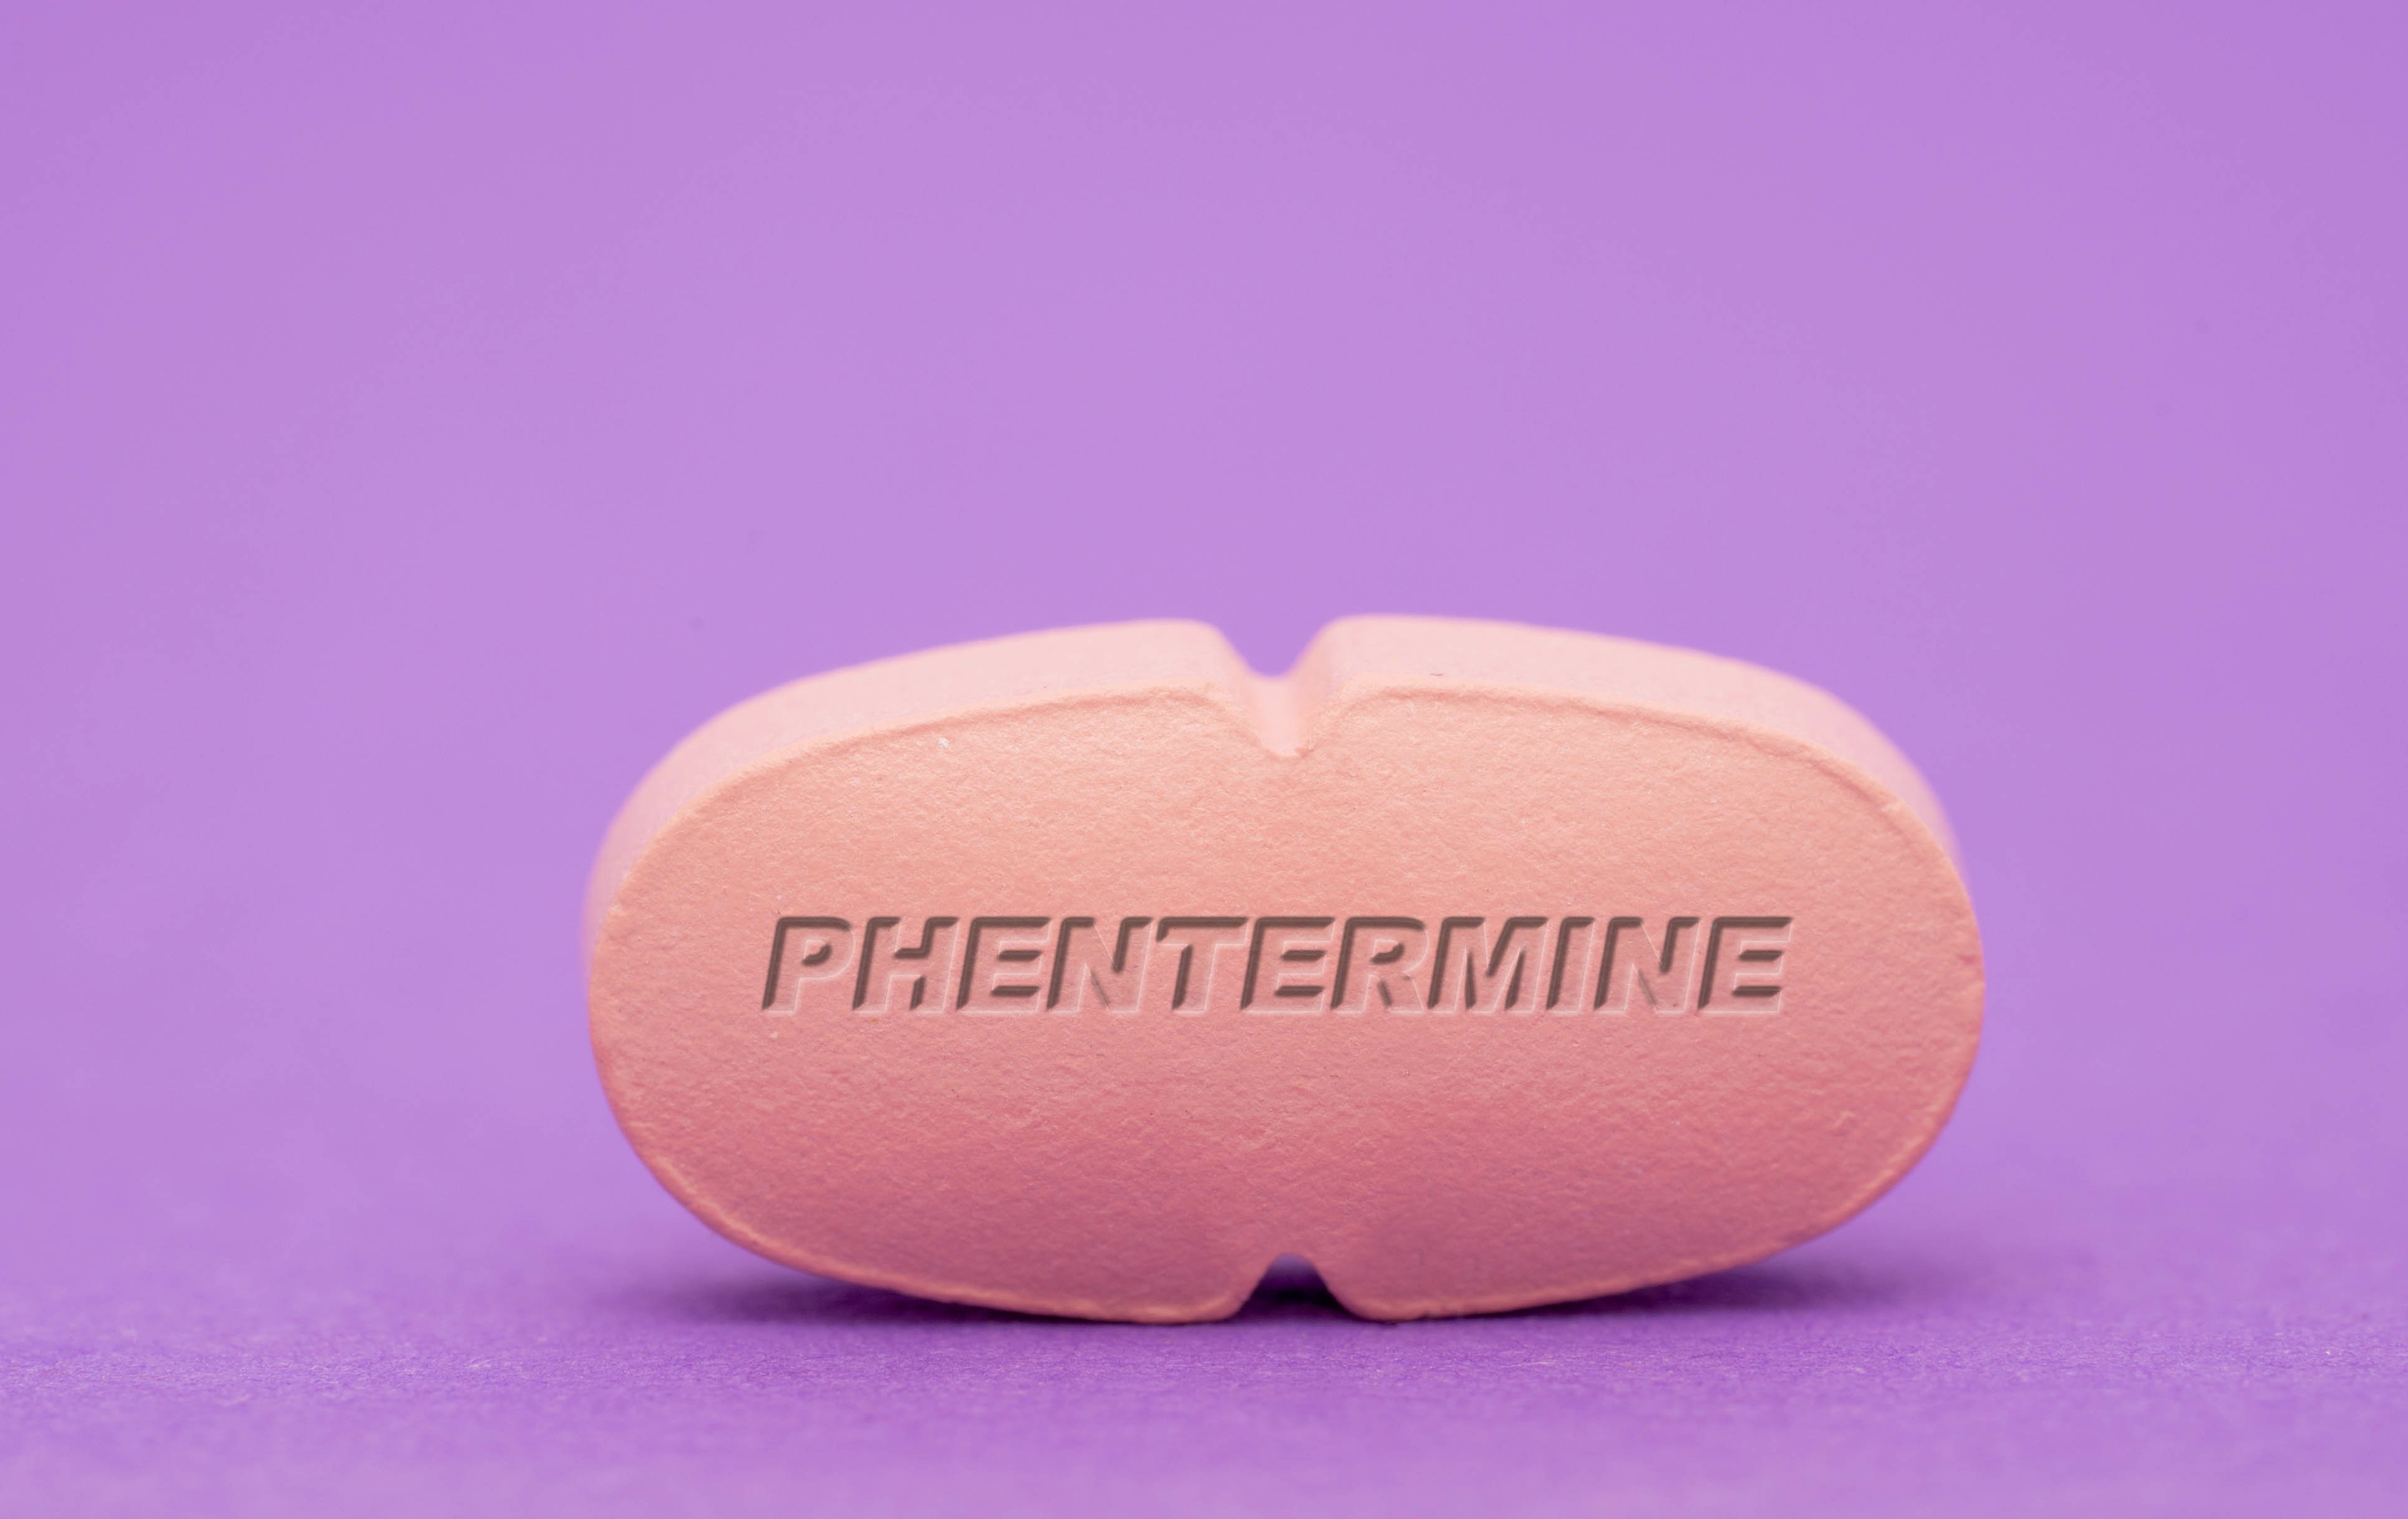 An image of a phentermine pill.